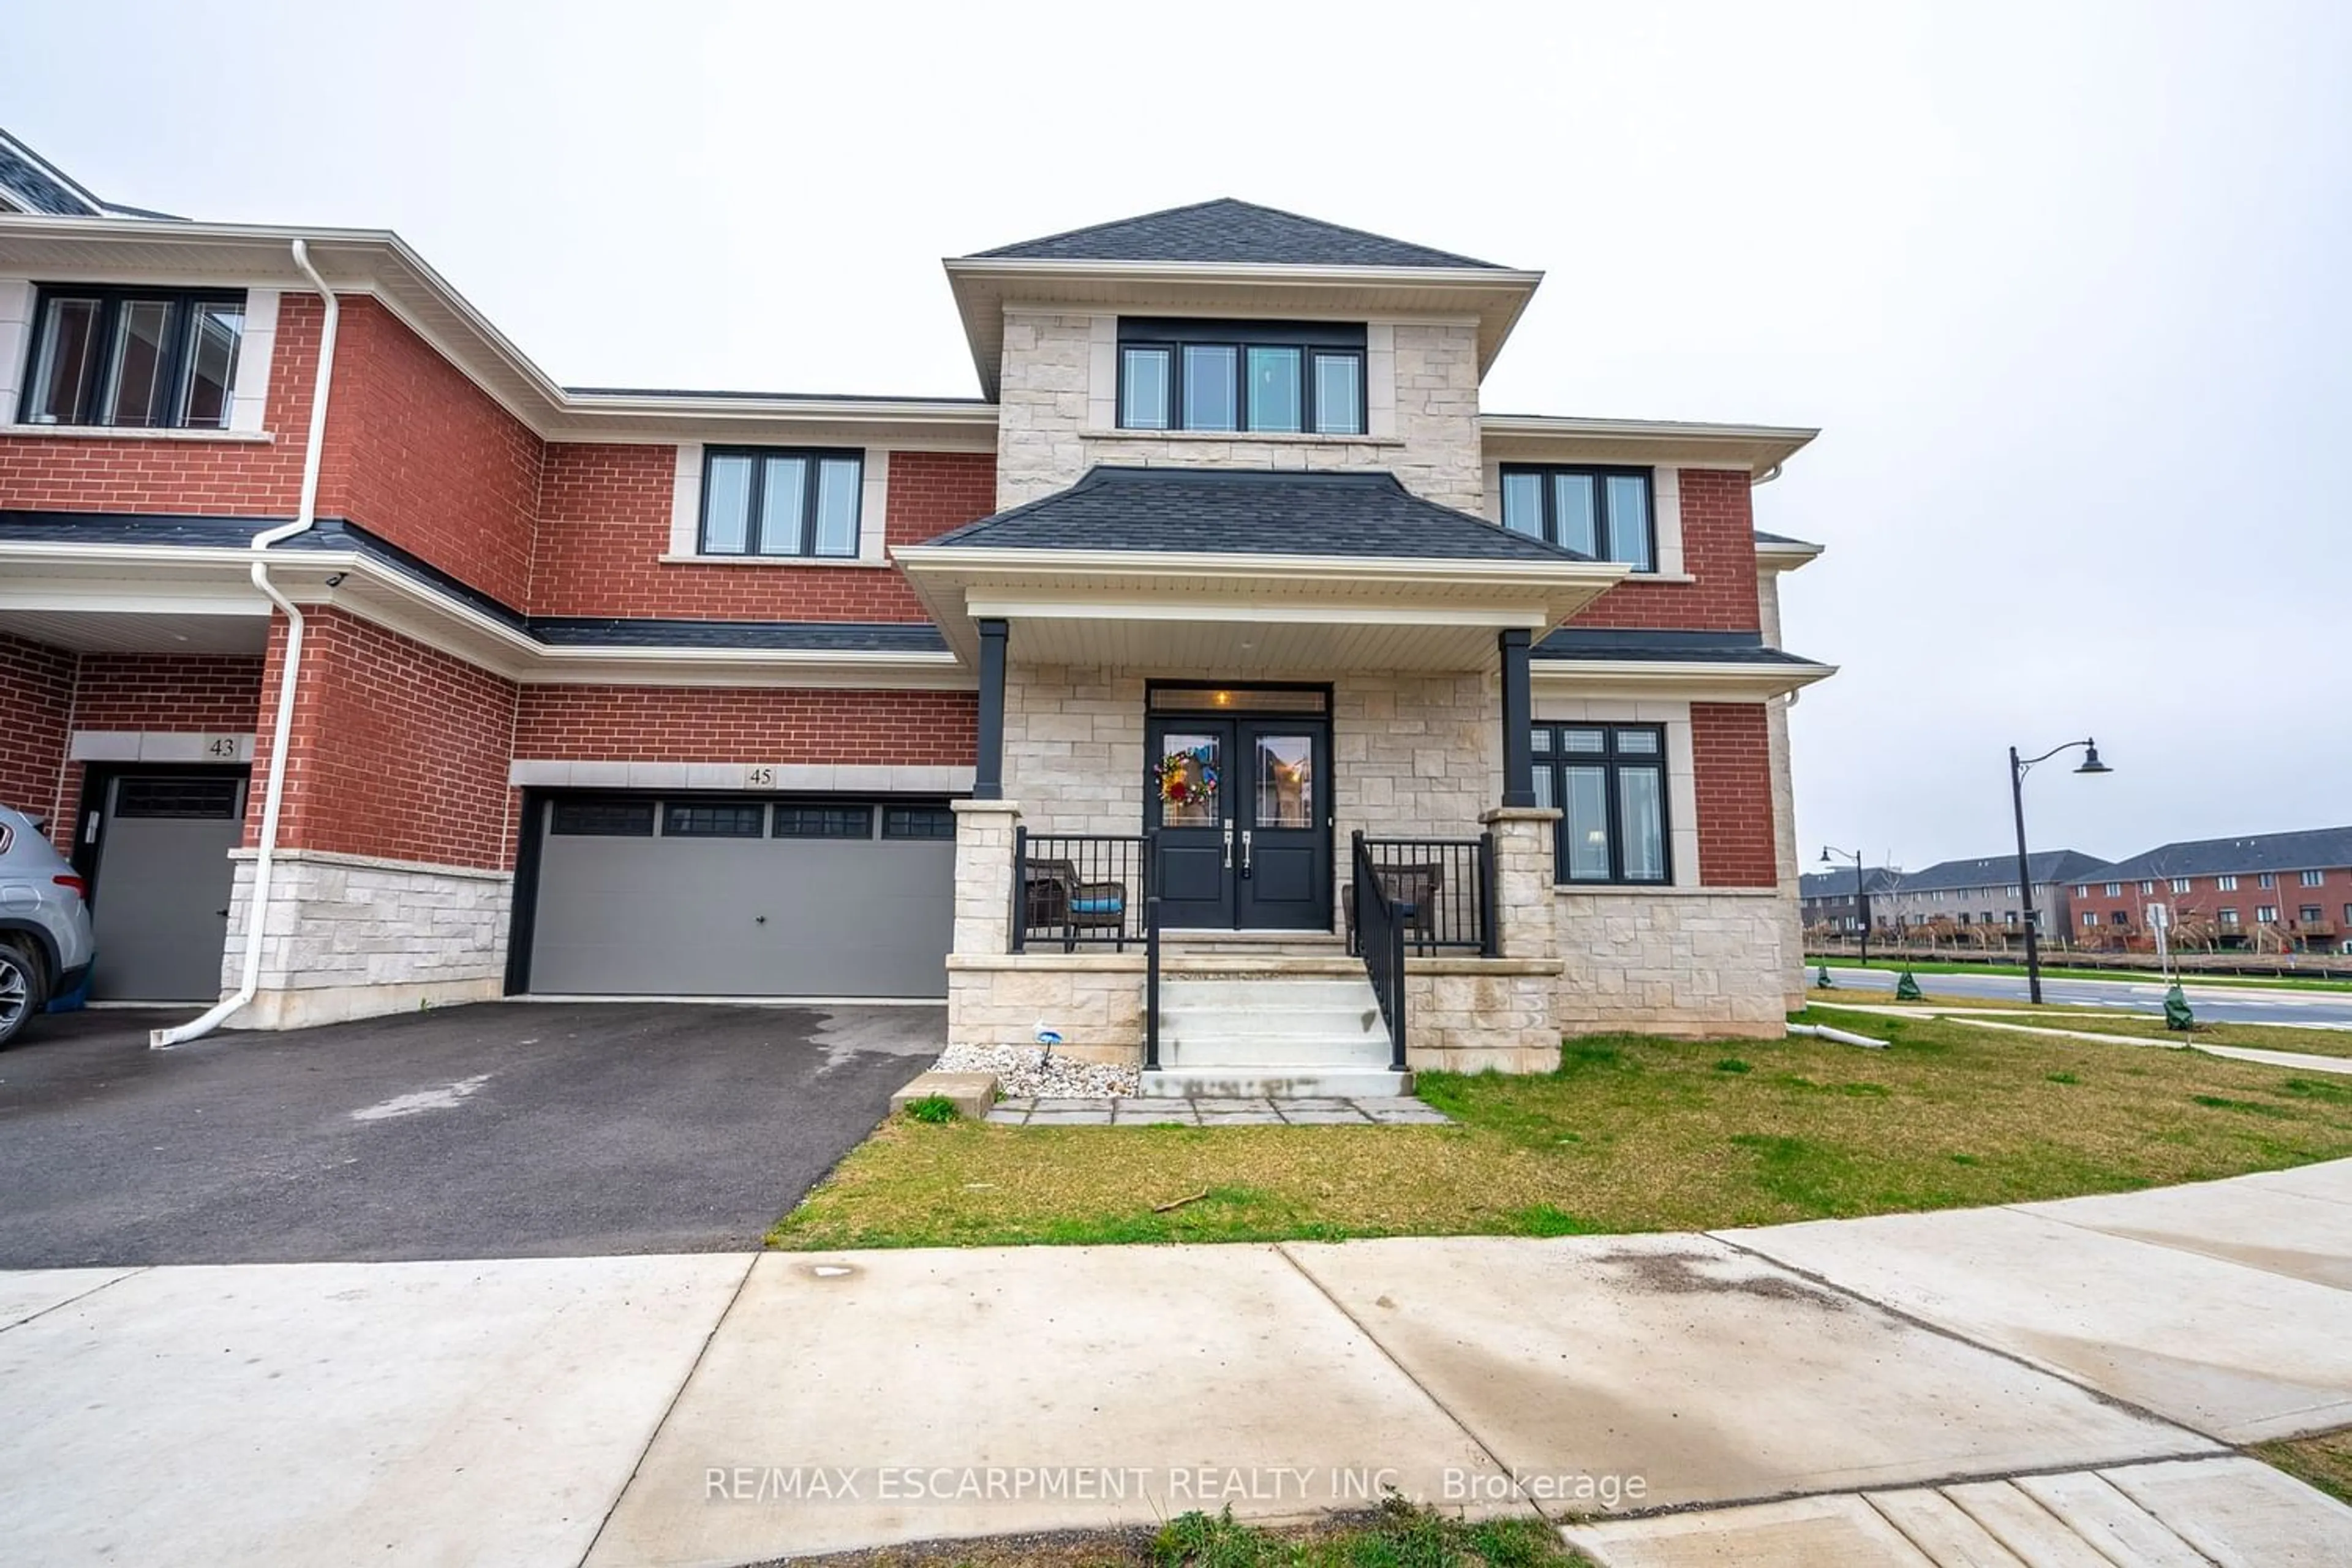 Home with brick exterior material for 45 Great Falls Blvd, Hamilton Ontario L8B 1X8